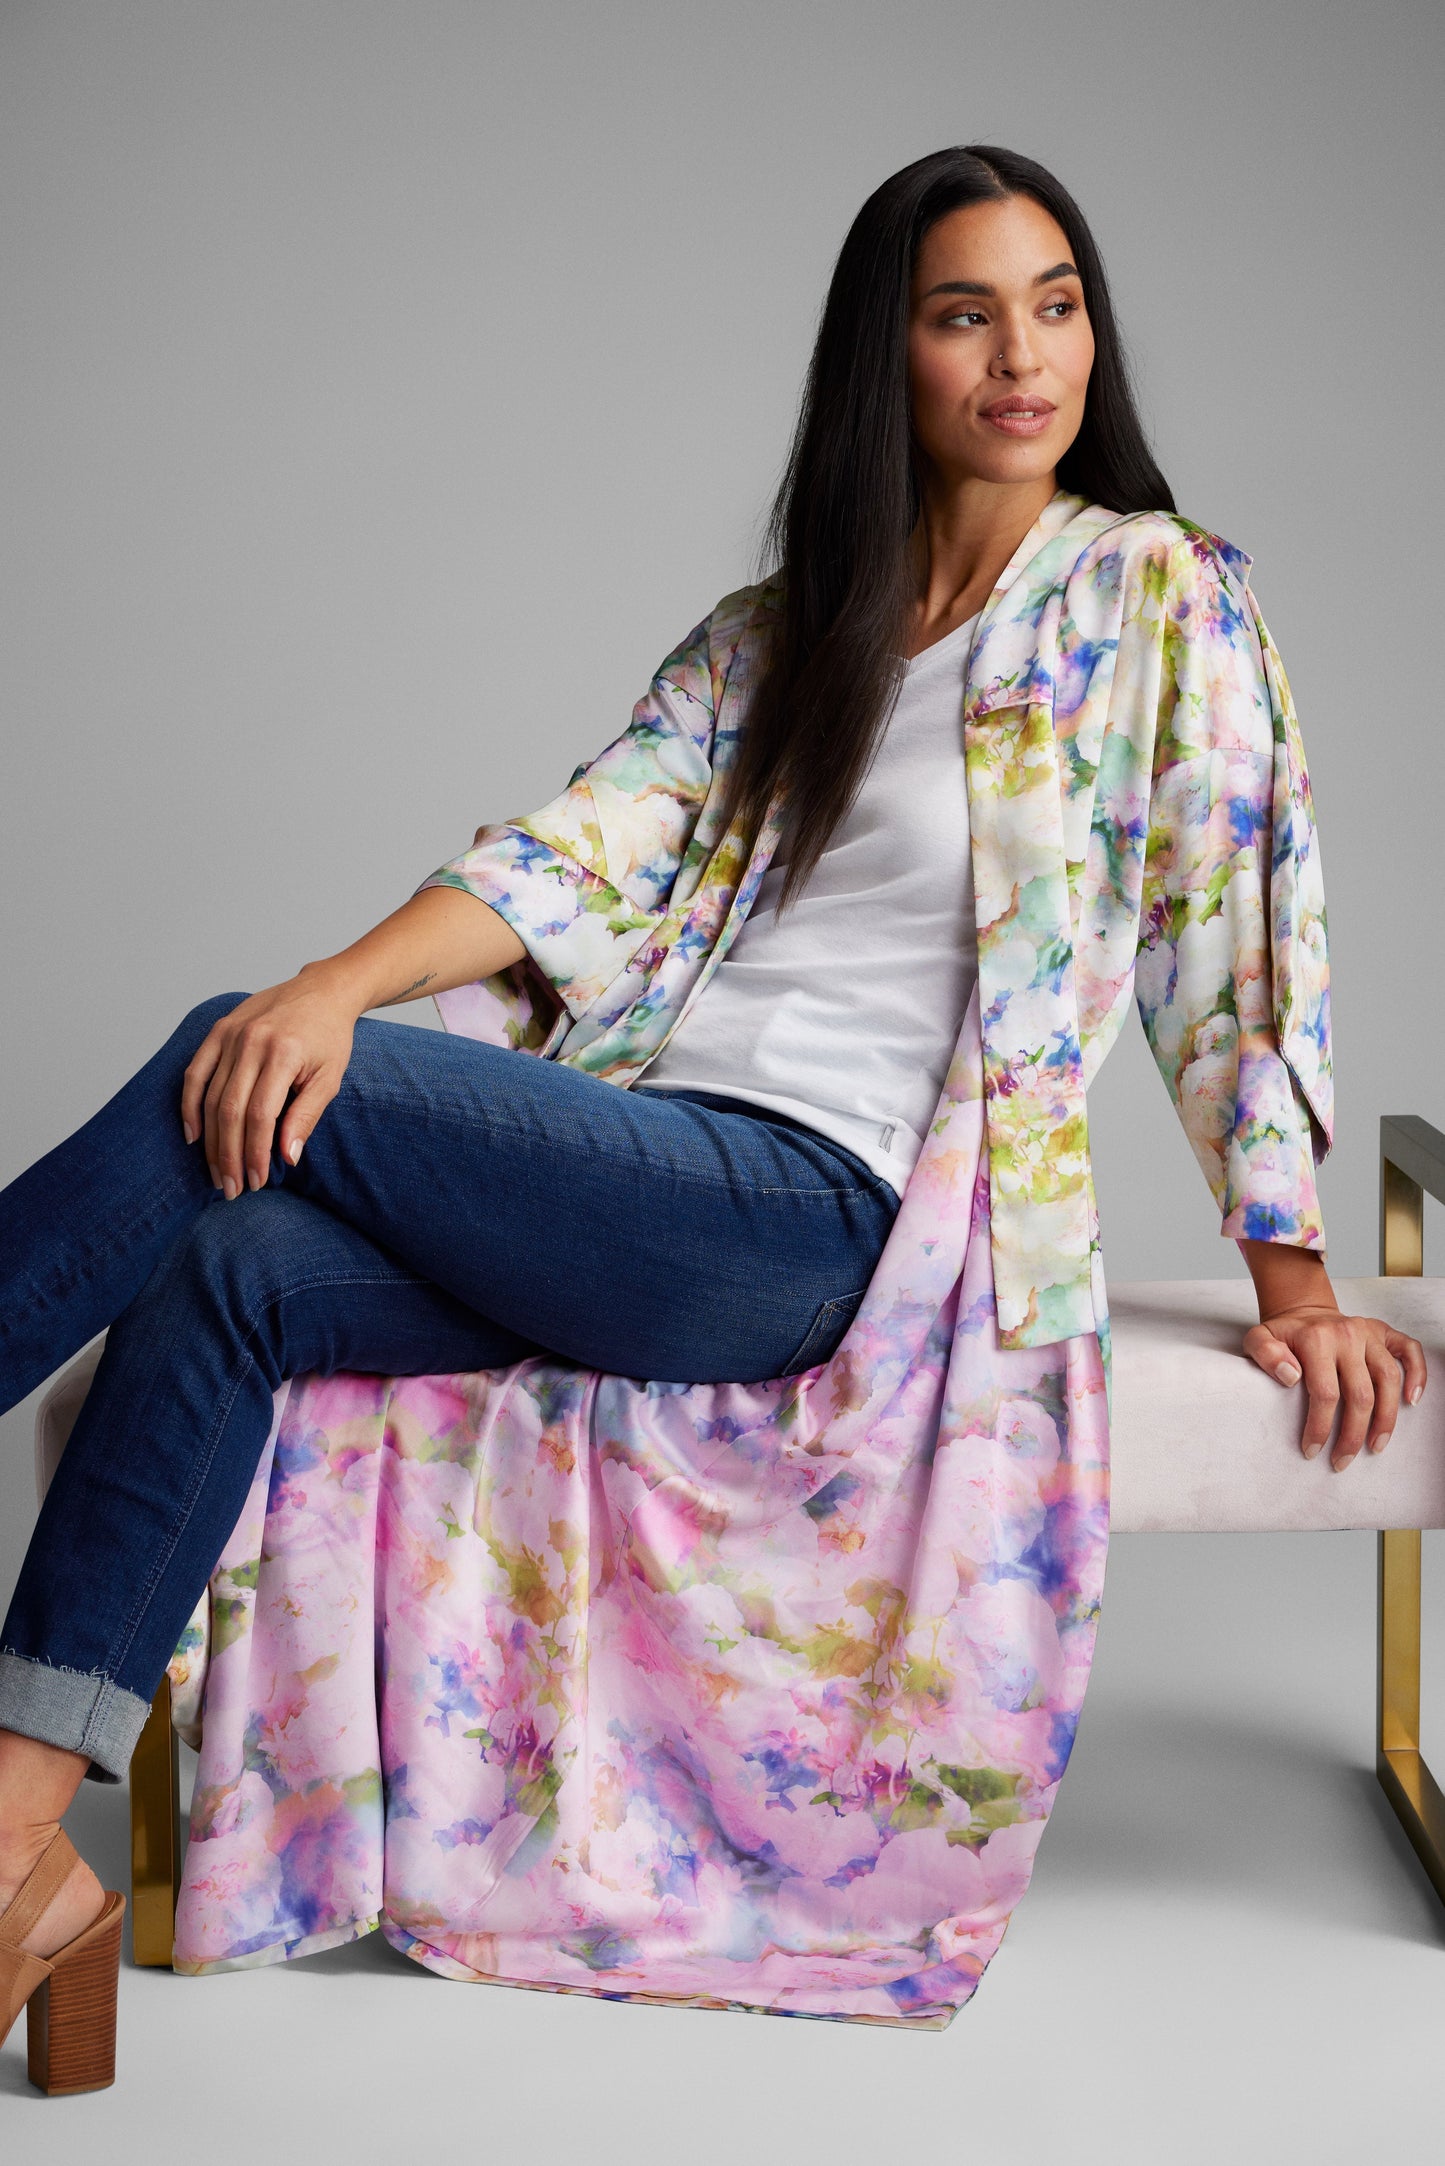 Woman lounging on a chair wearing an all over floral print kimono duster made from recycled materials